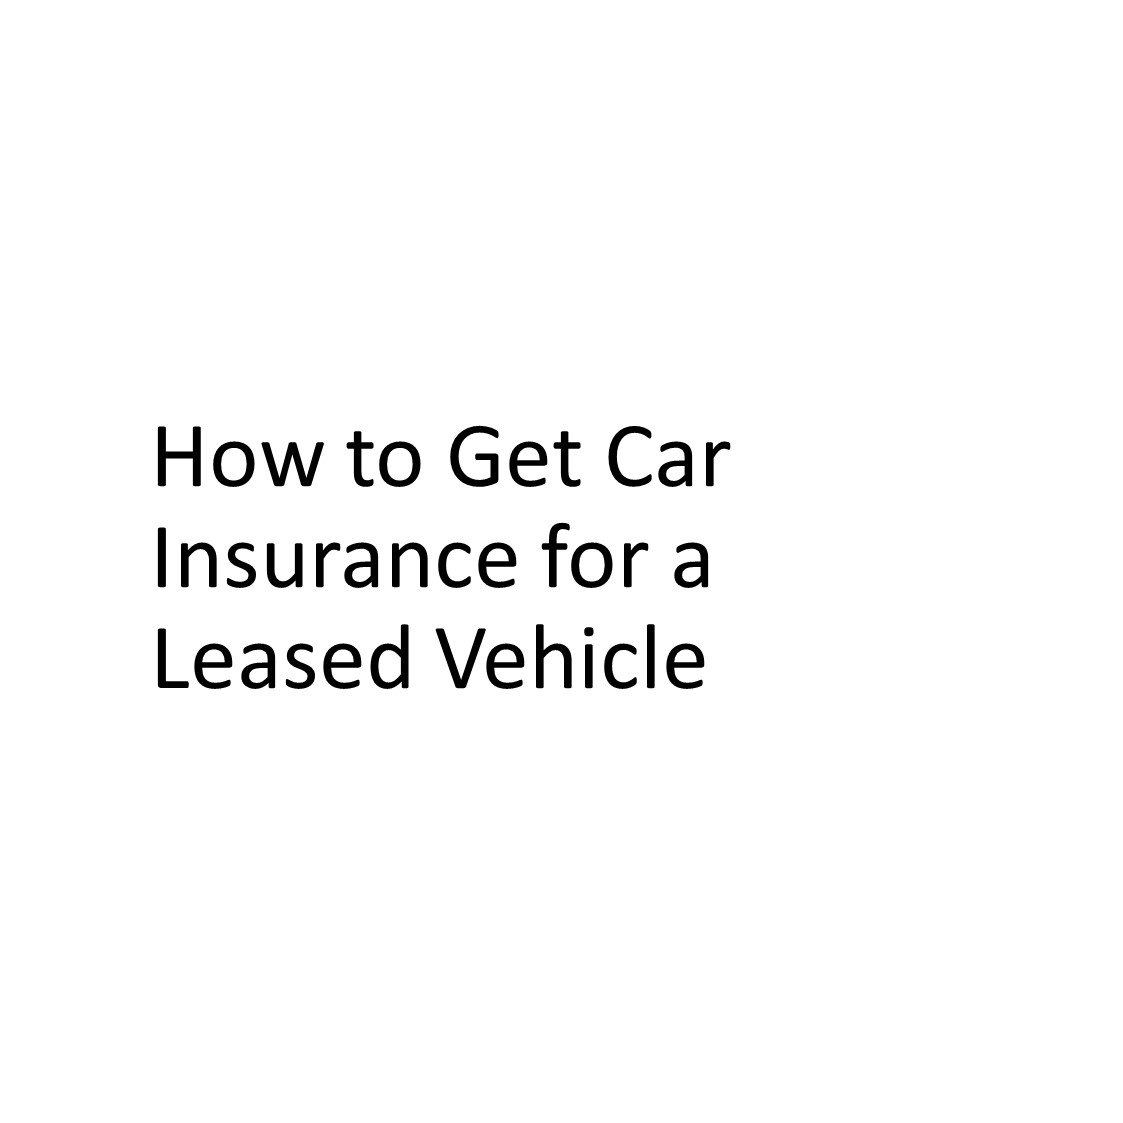 How to Get Car Insurance for a Leased Vehicle